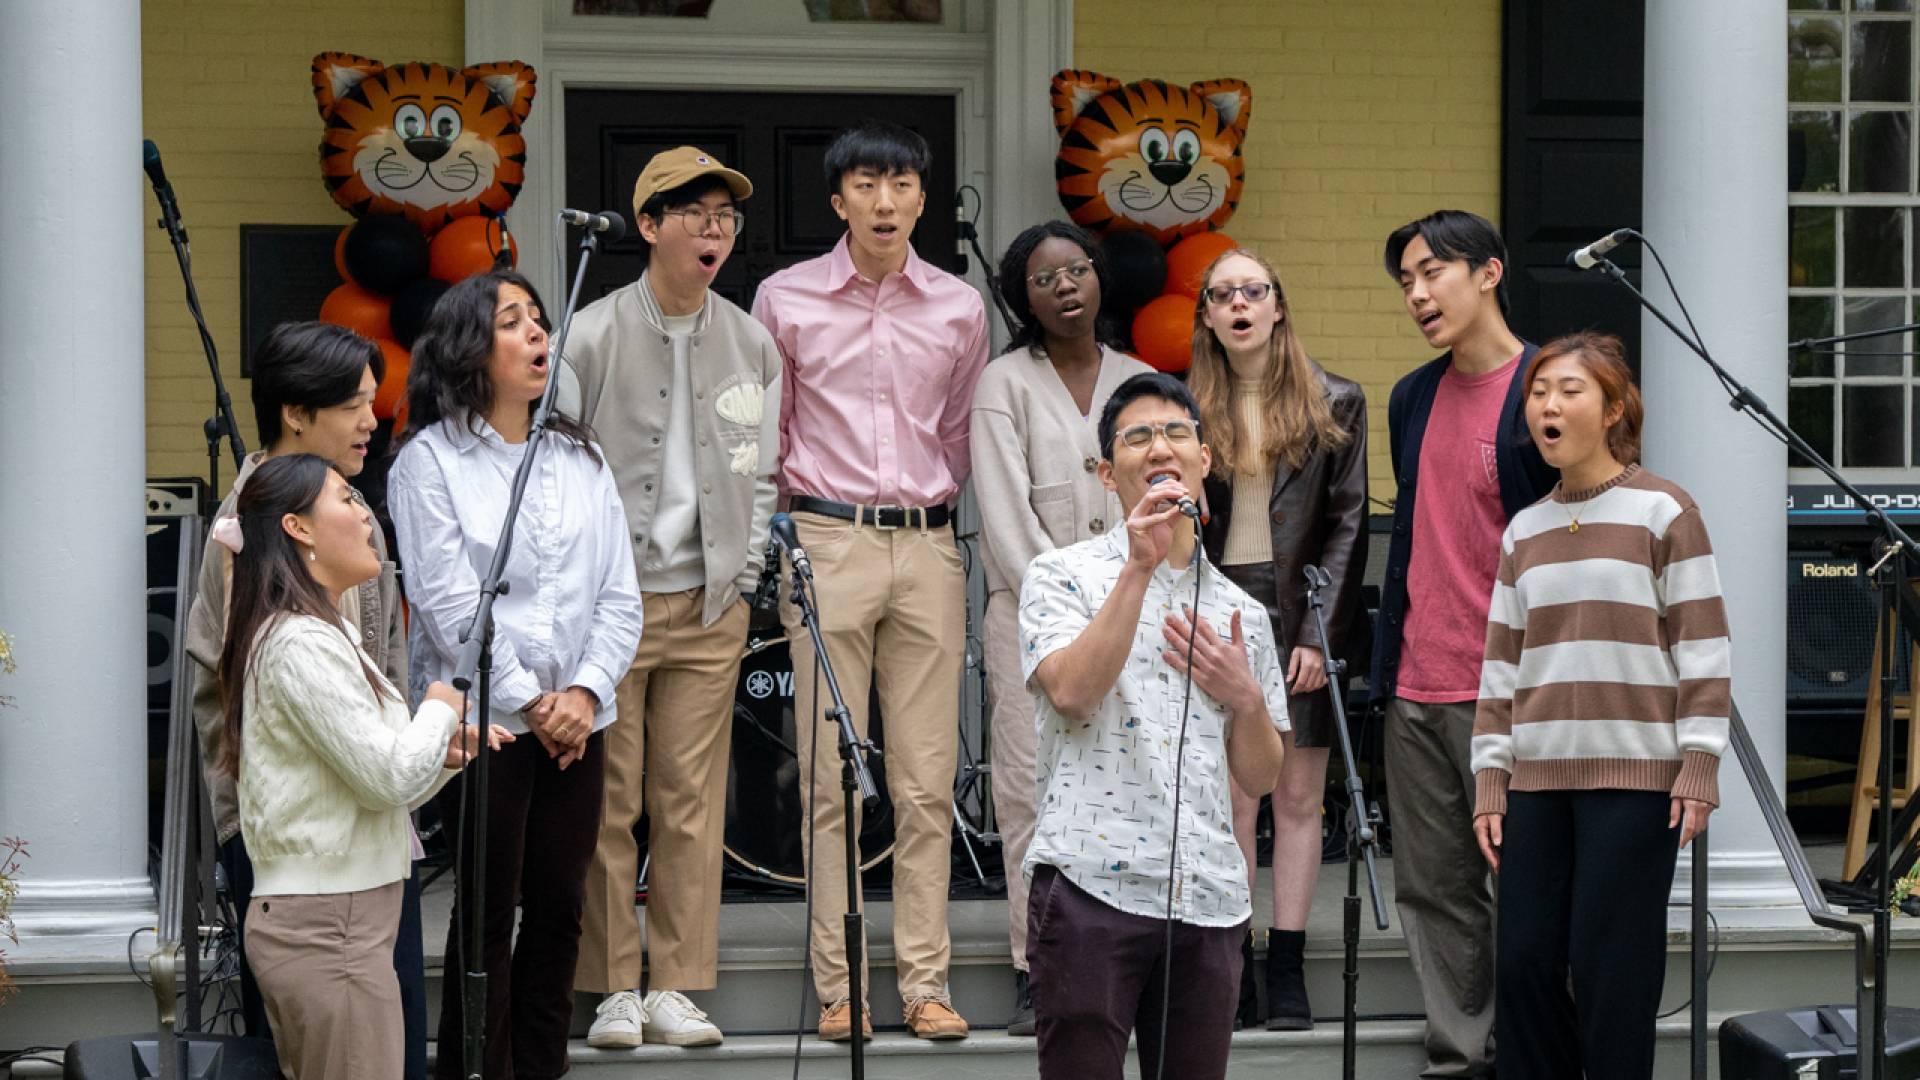 A cappella group performing on stairs